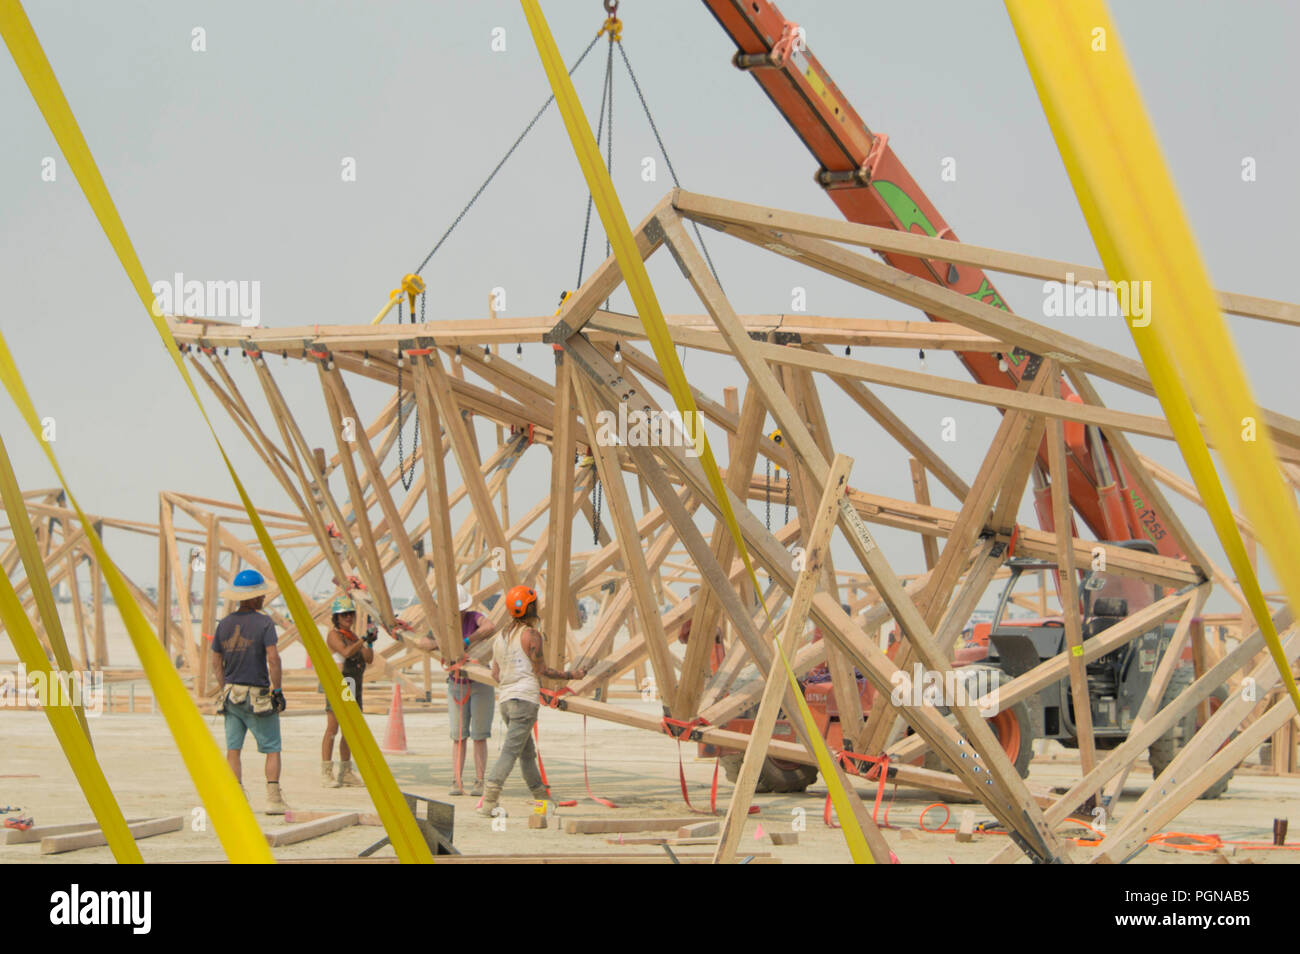 Workers assembly an art installation in preparation at the for attendees at the annual Burning Man counter culture festival in the desert August 23, 2018 near Black Rock, Nevada. Each year 80,000 of people set up a temporary art city in the middle of the desert. Stock Photo